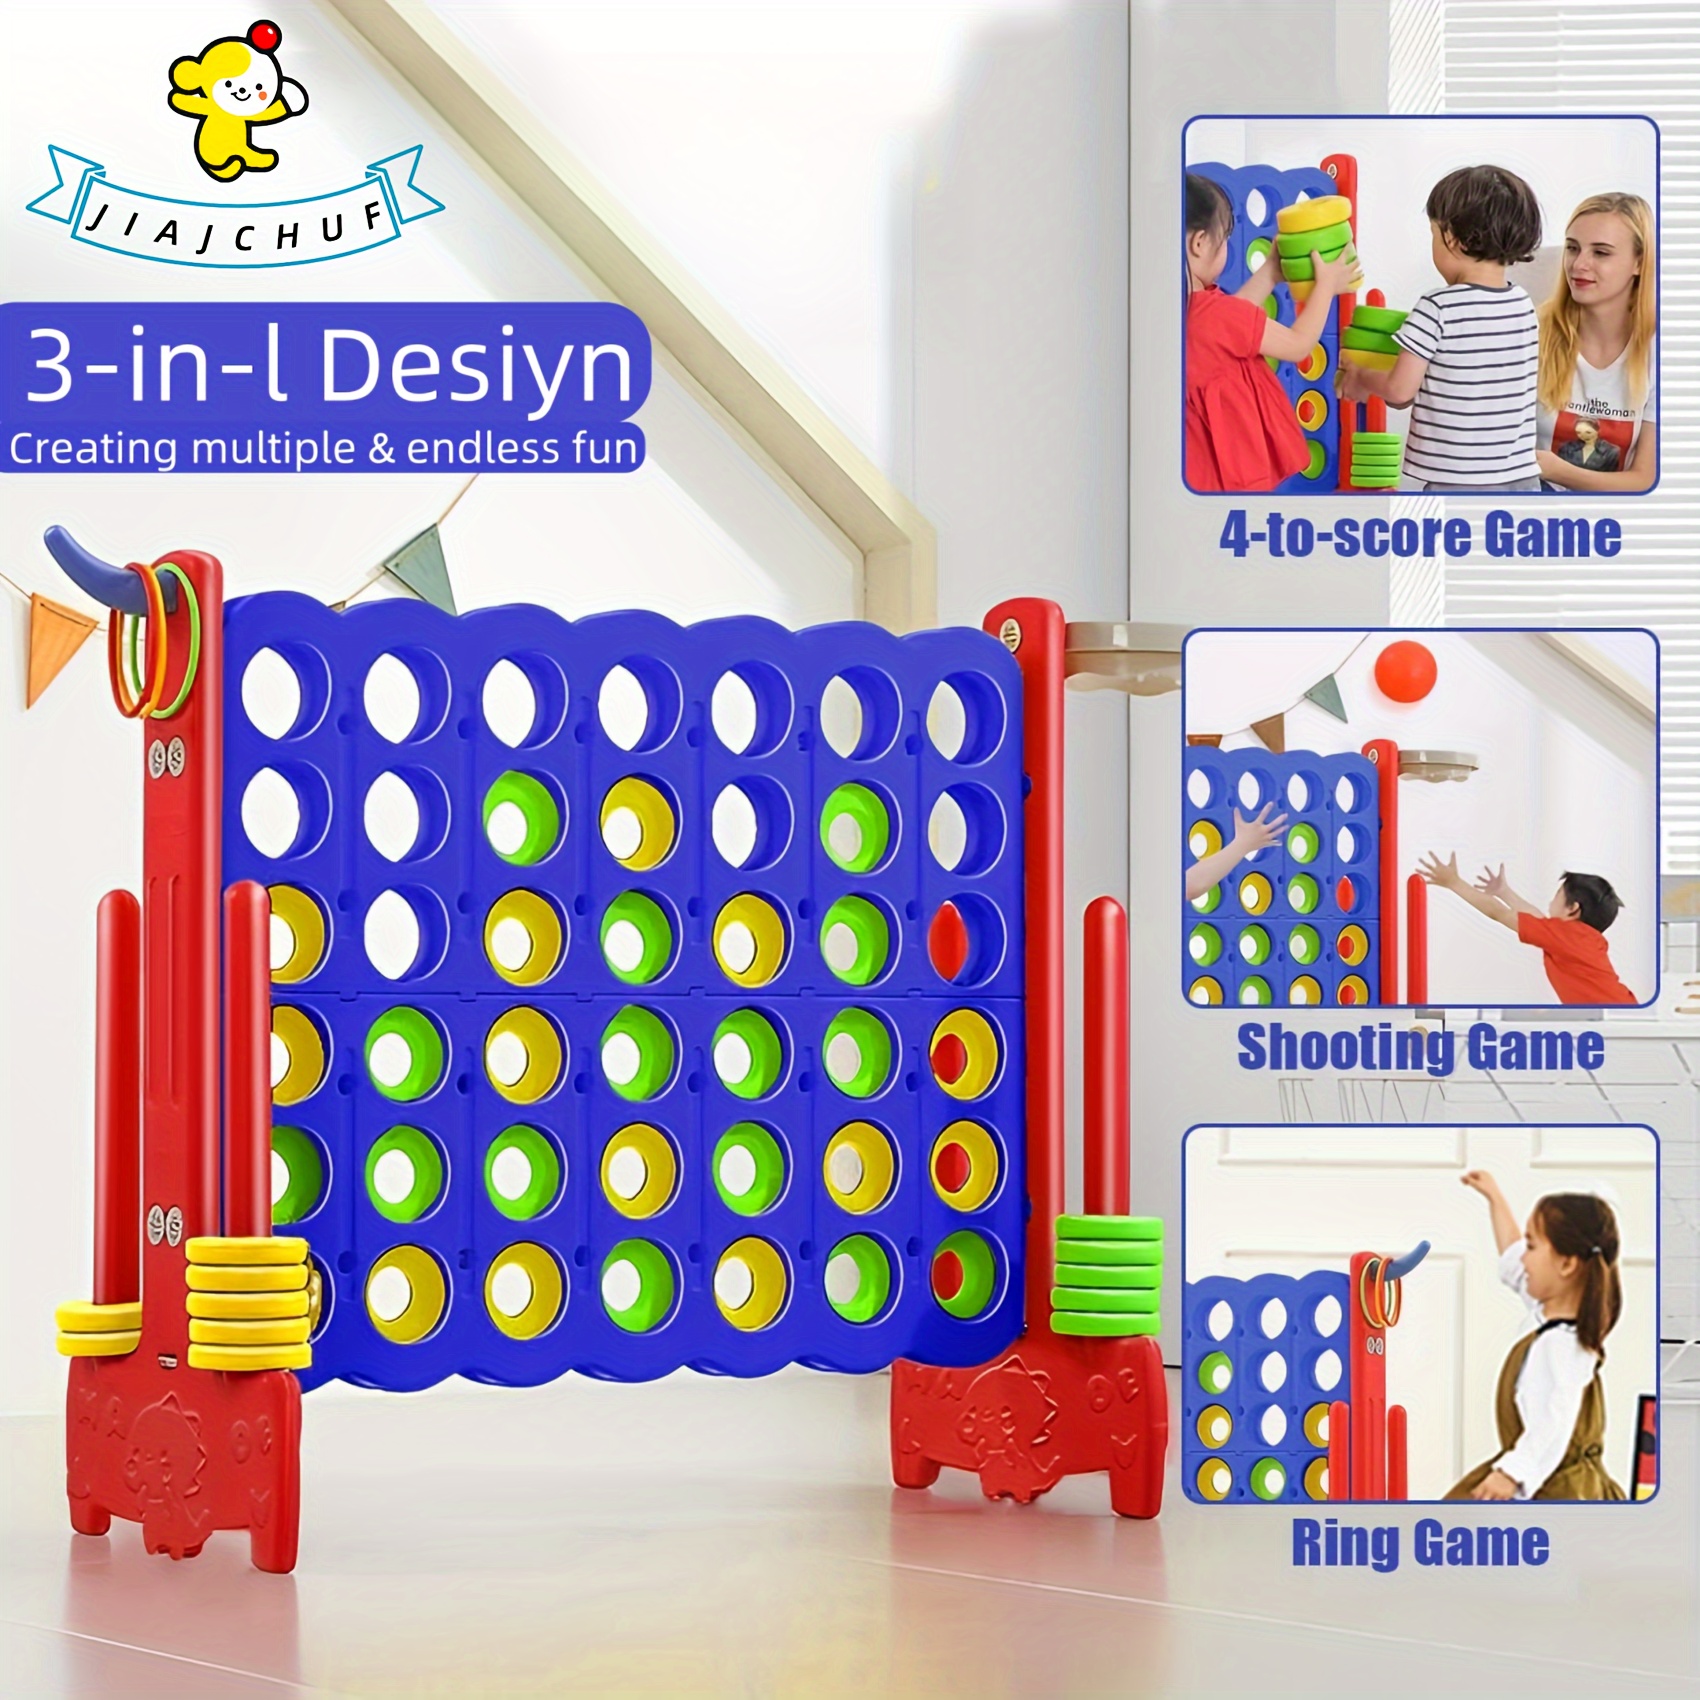 

Giant 3-in-1 Game Board 4-point Mega Game/basketball Hoop, Throwing Ring Easy To Install Christmas, Gift